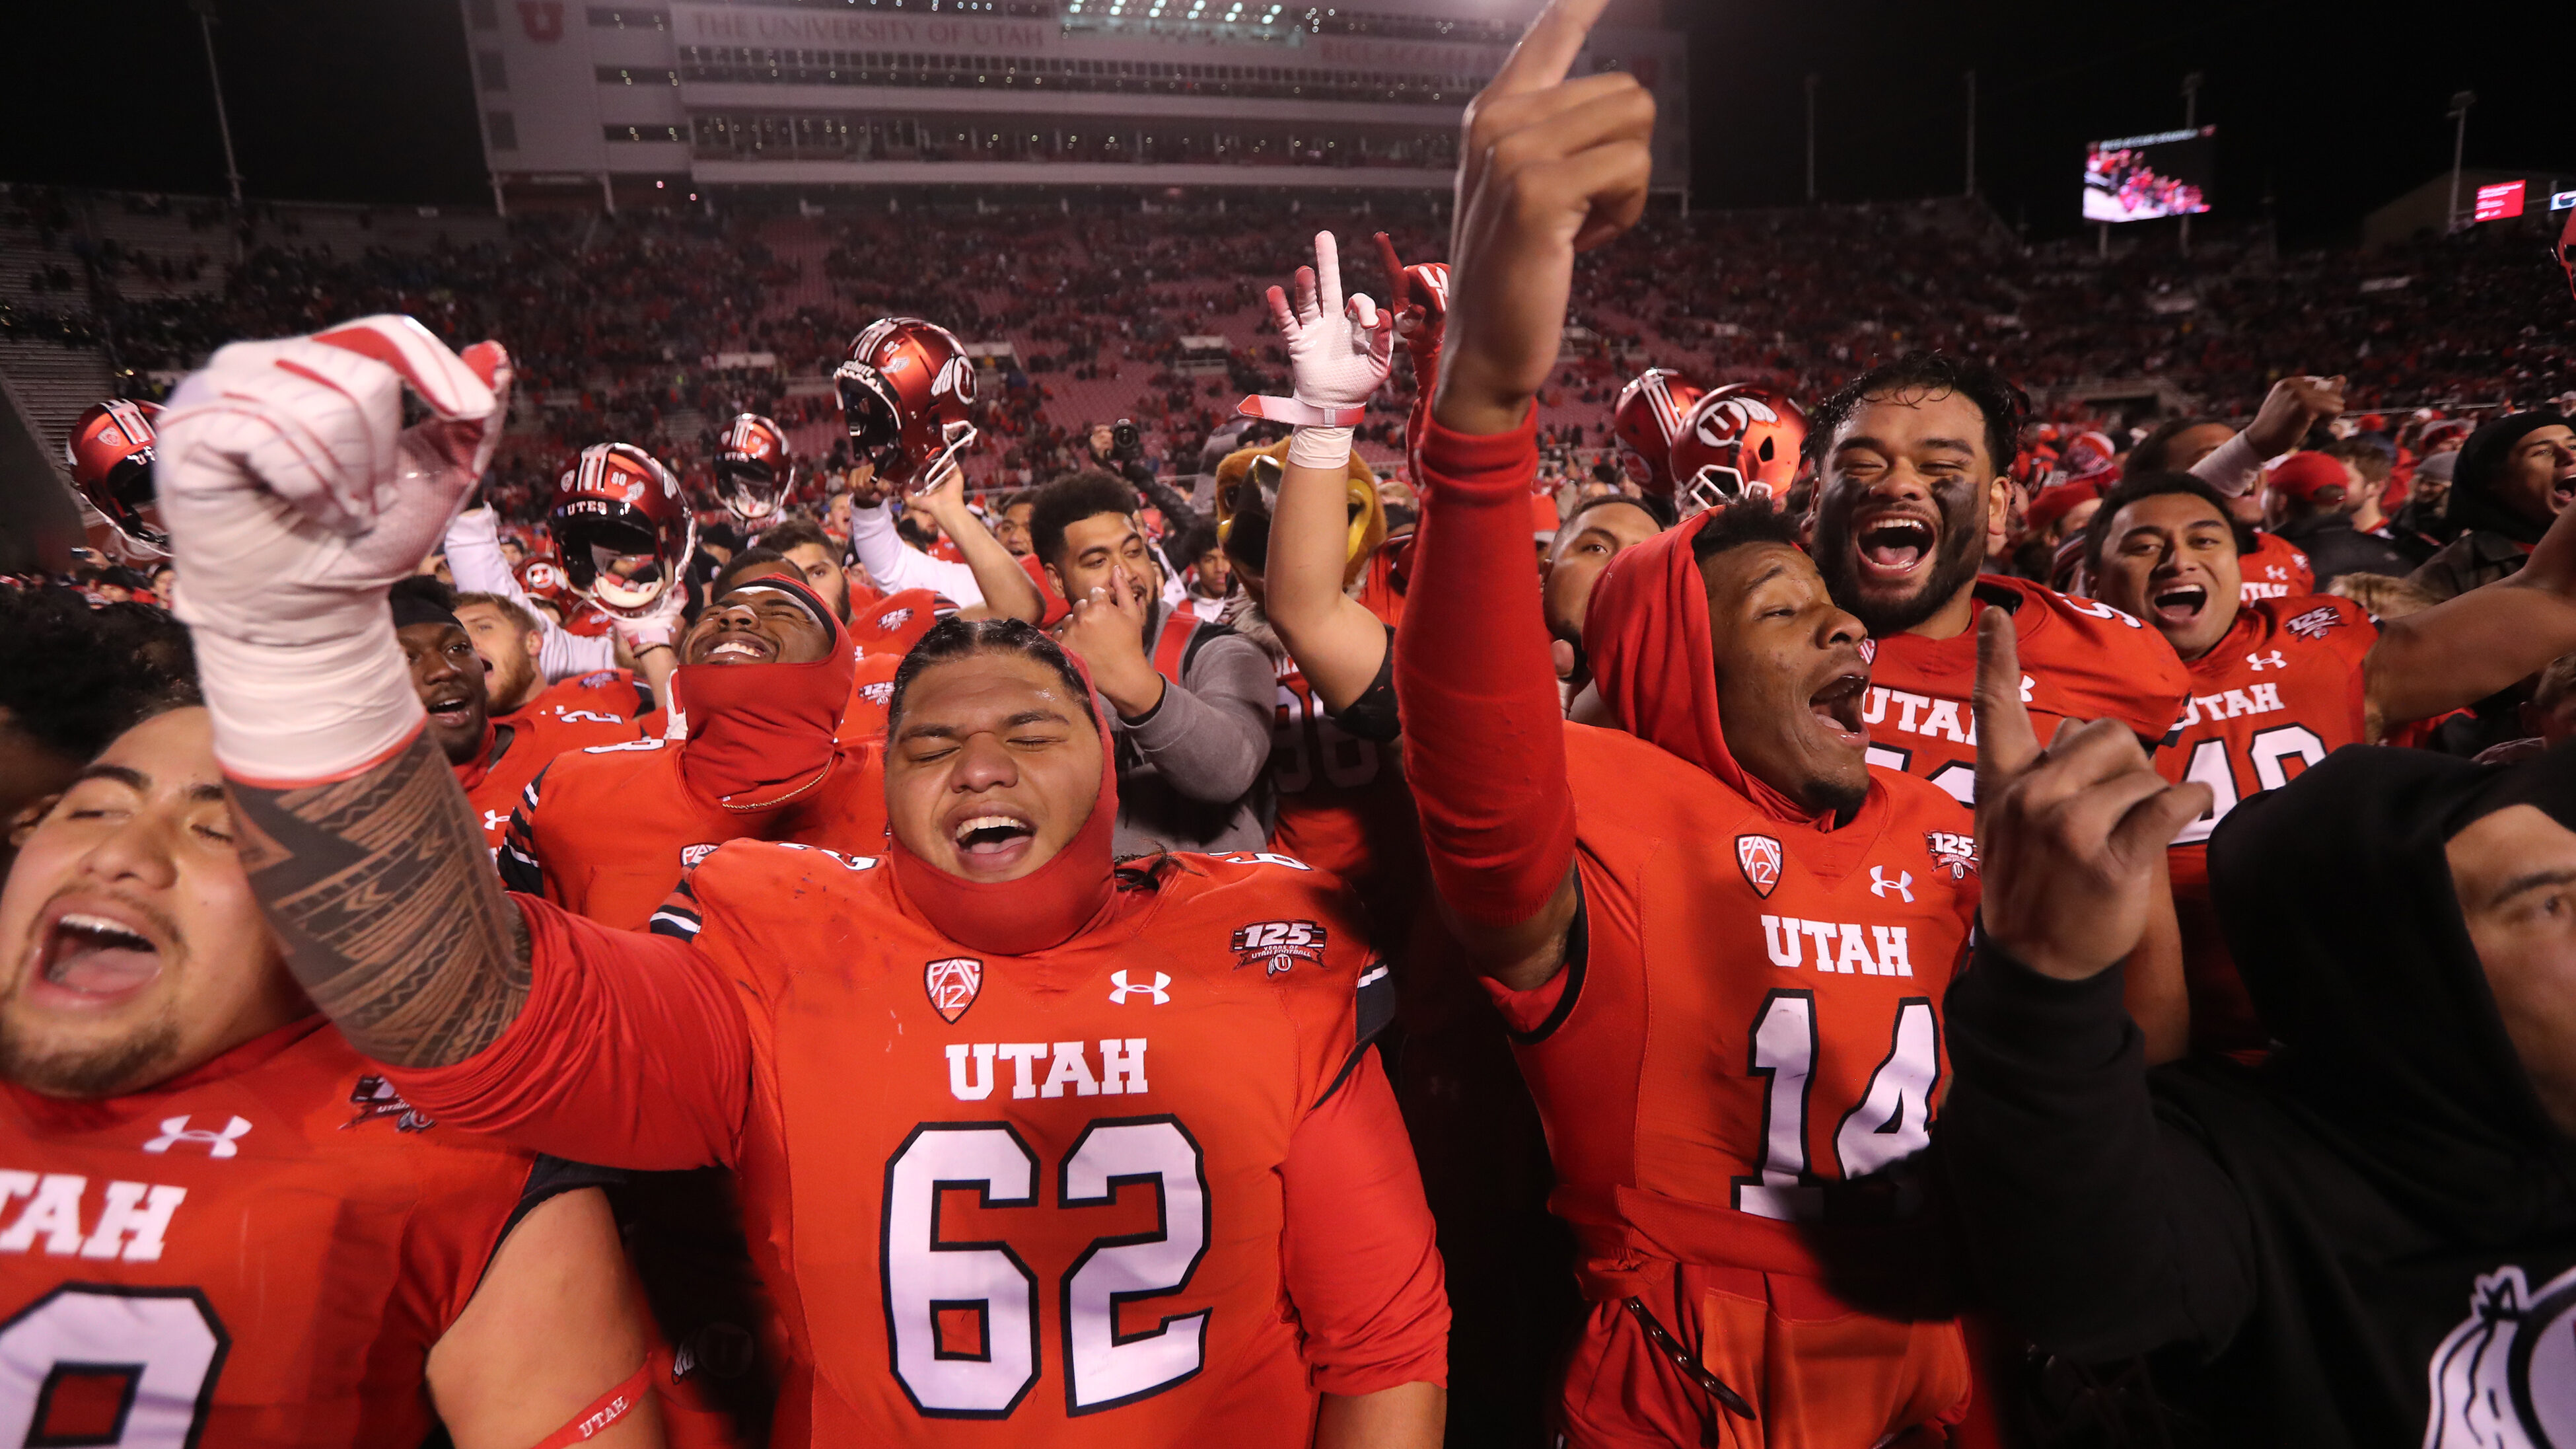 utah football players, nil contracts in utah might be changing...